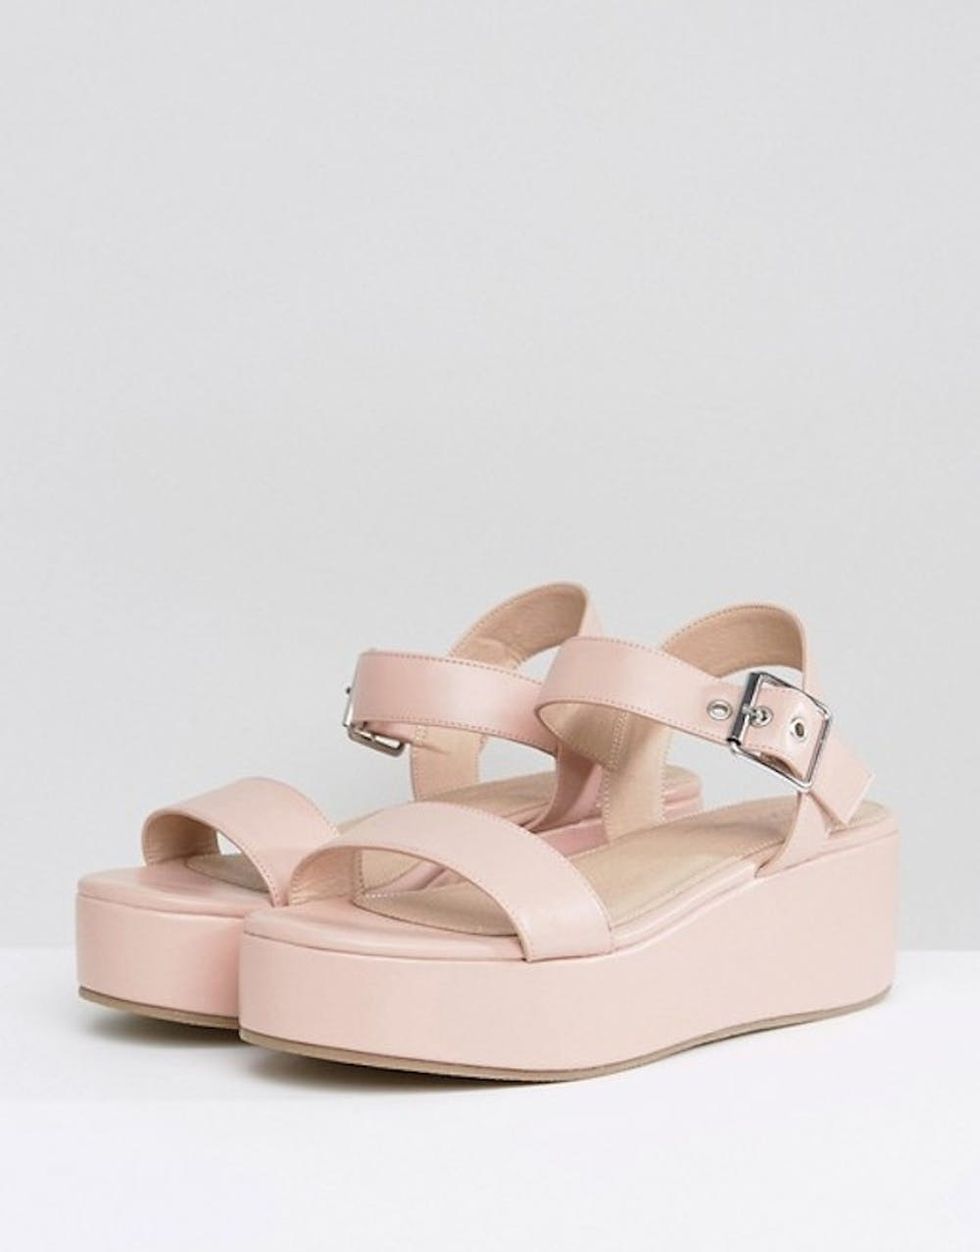 15 Vacay-Ready Summer Sandals to Put Pep in Your Step This Season ...